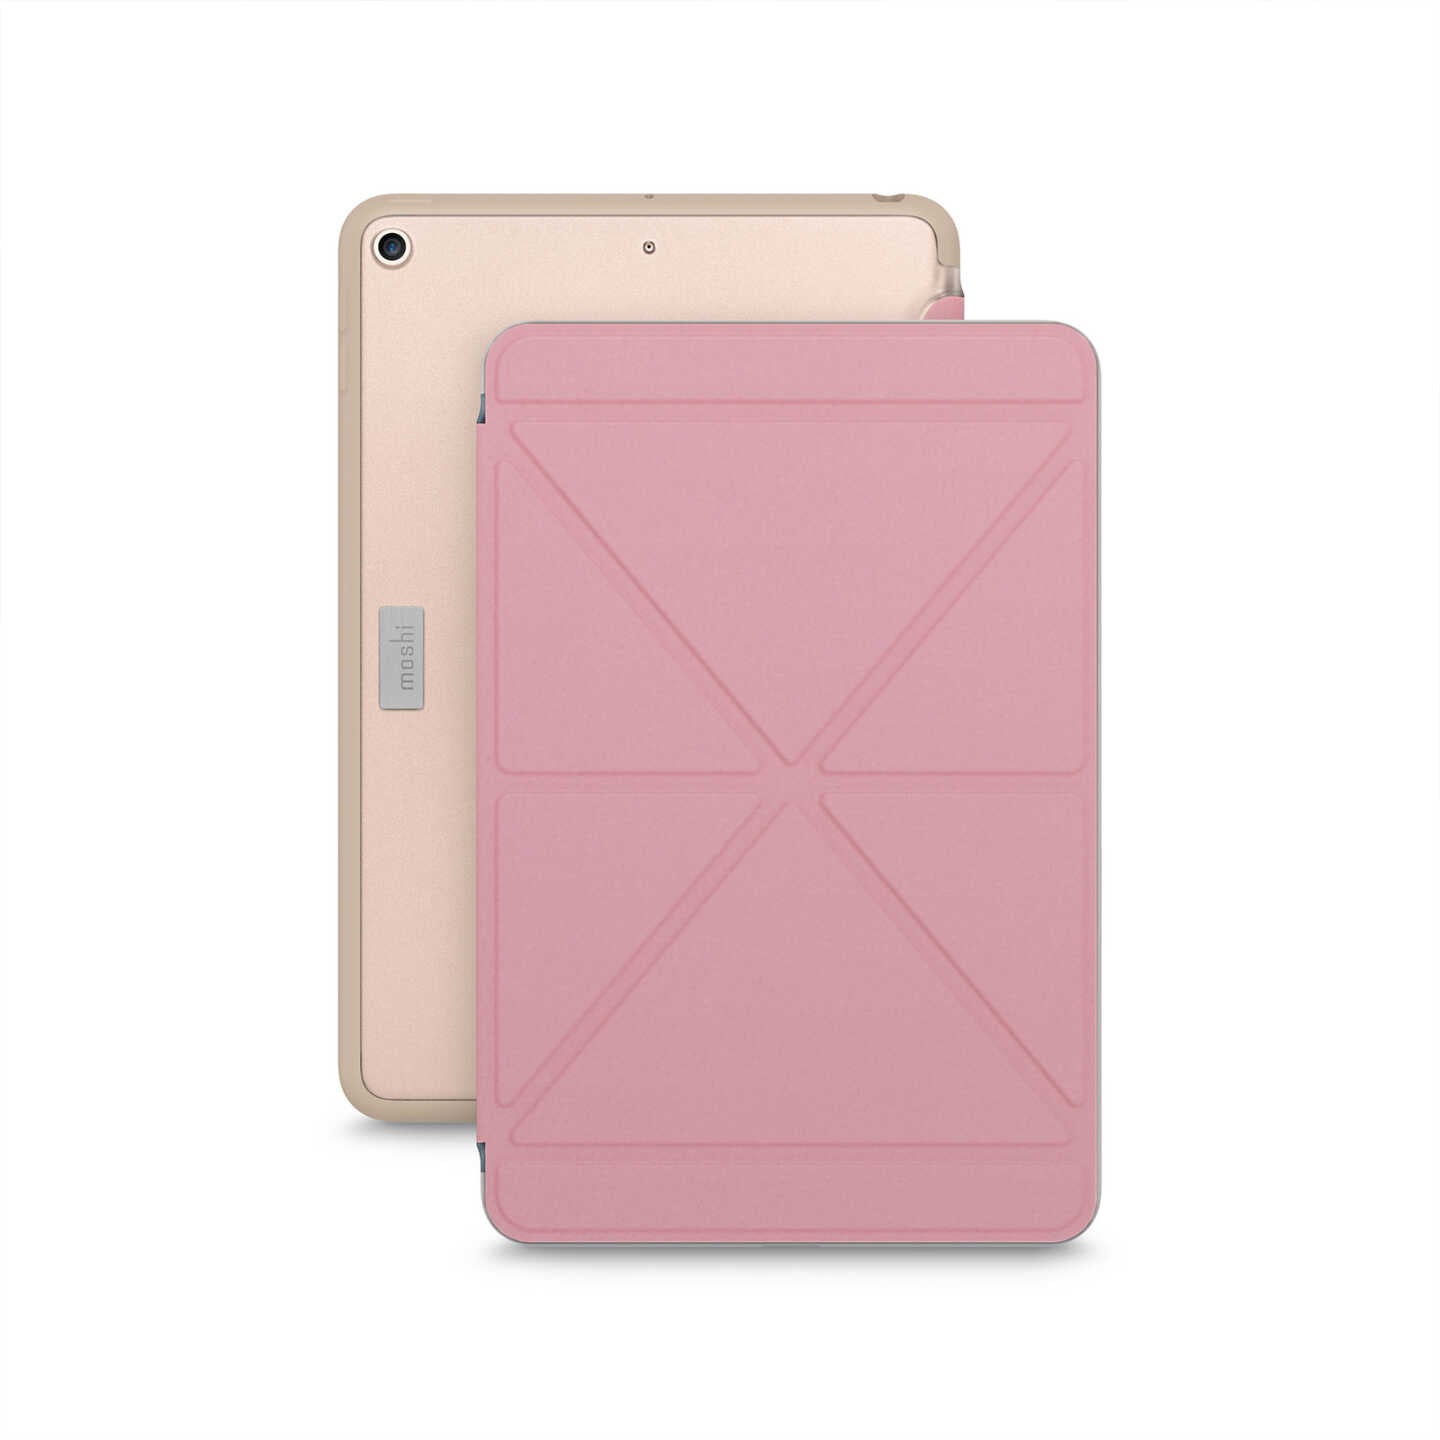 Moshi VersaCover Case with Folding Cover for iPad mini 6th Gen